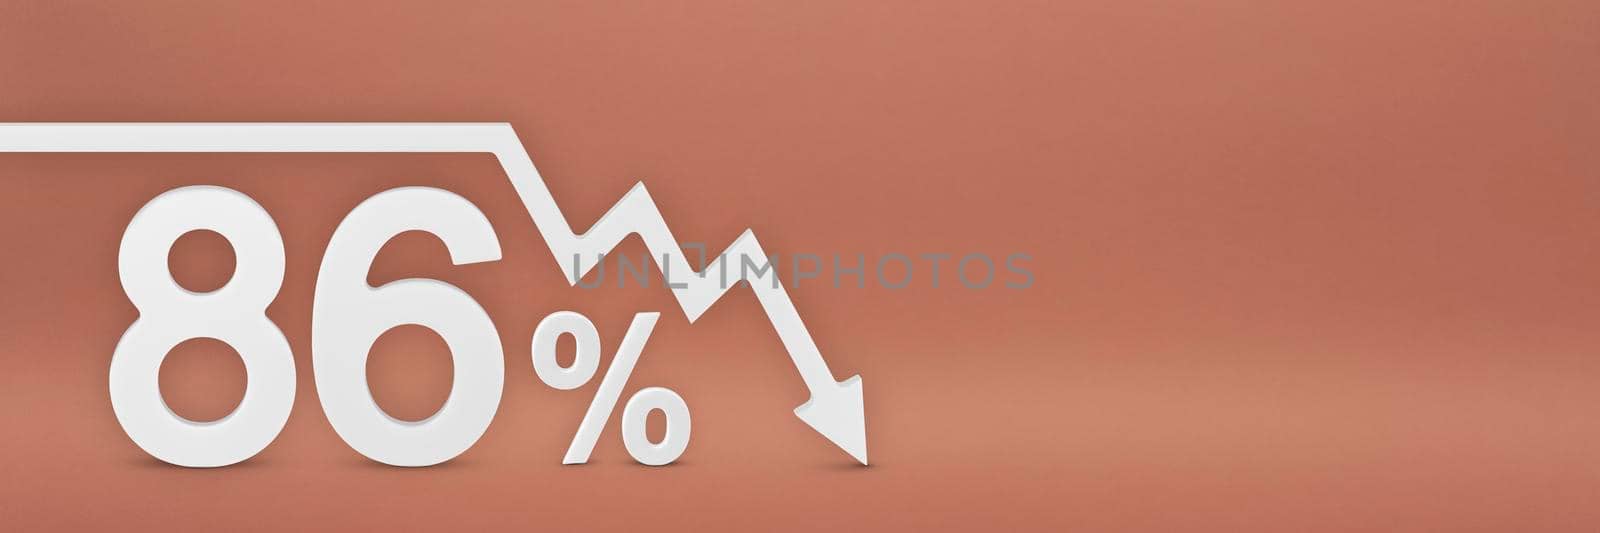 eighty-six percent, the arrow on the graph is pointing down. Stock market crash, bear market, inflation.Economic collapse, collapse of stocks.3d banner,86 percent discount sign on a red background. by SERSOL